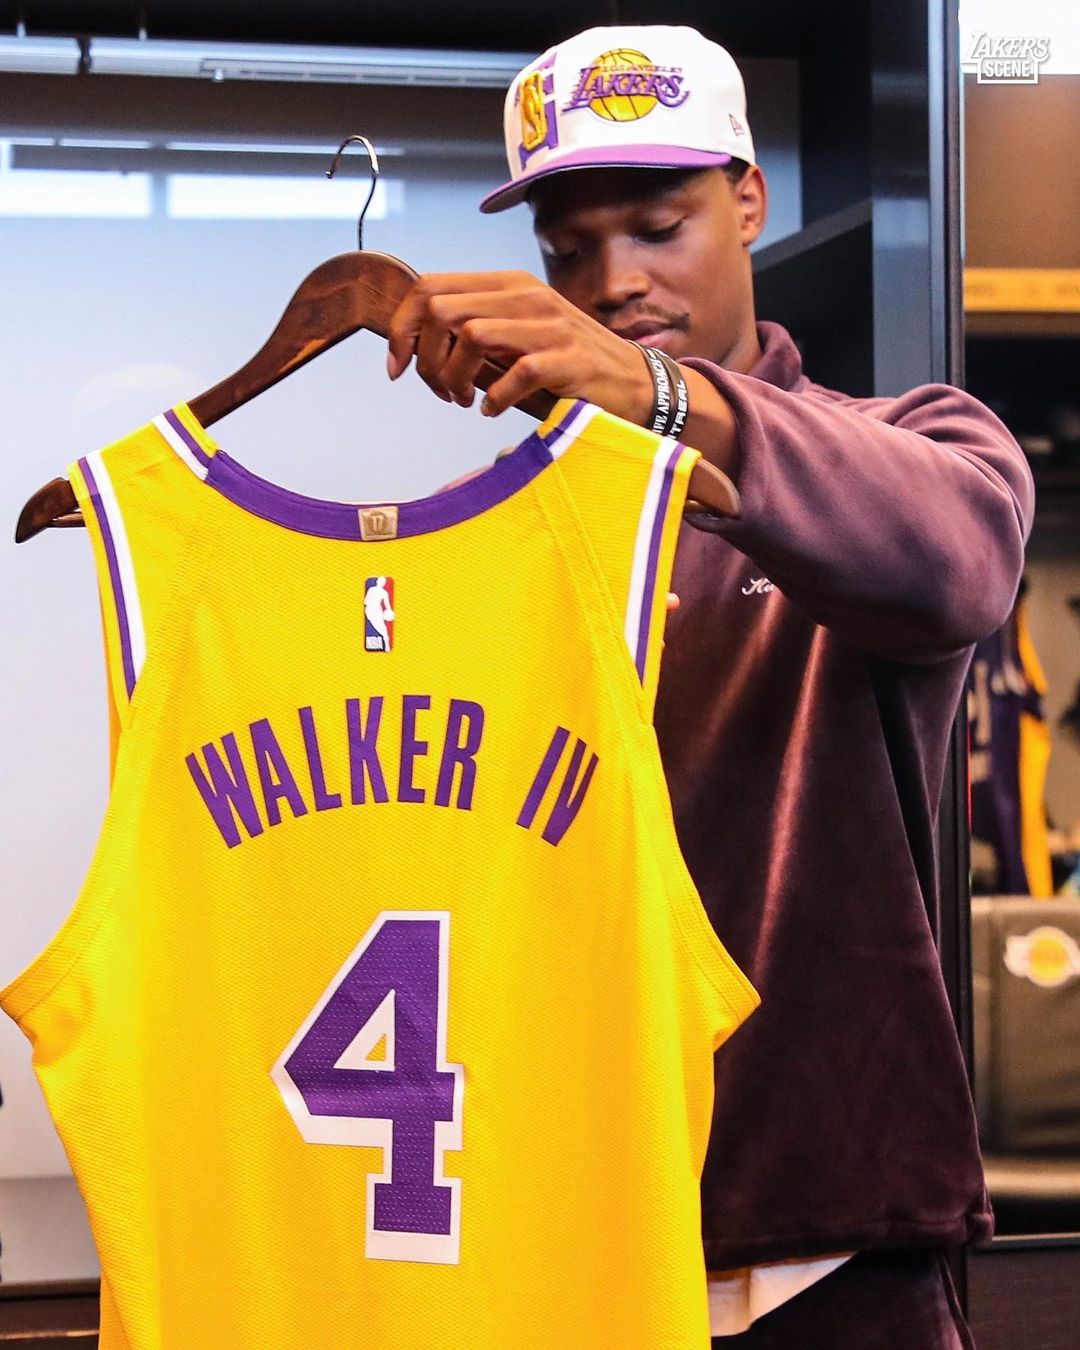 New threads, same aspirations. Welcome to the #LakeShow...